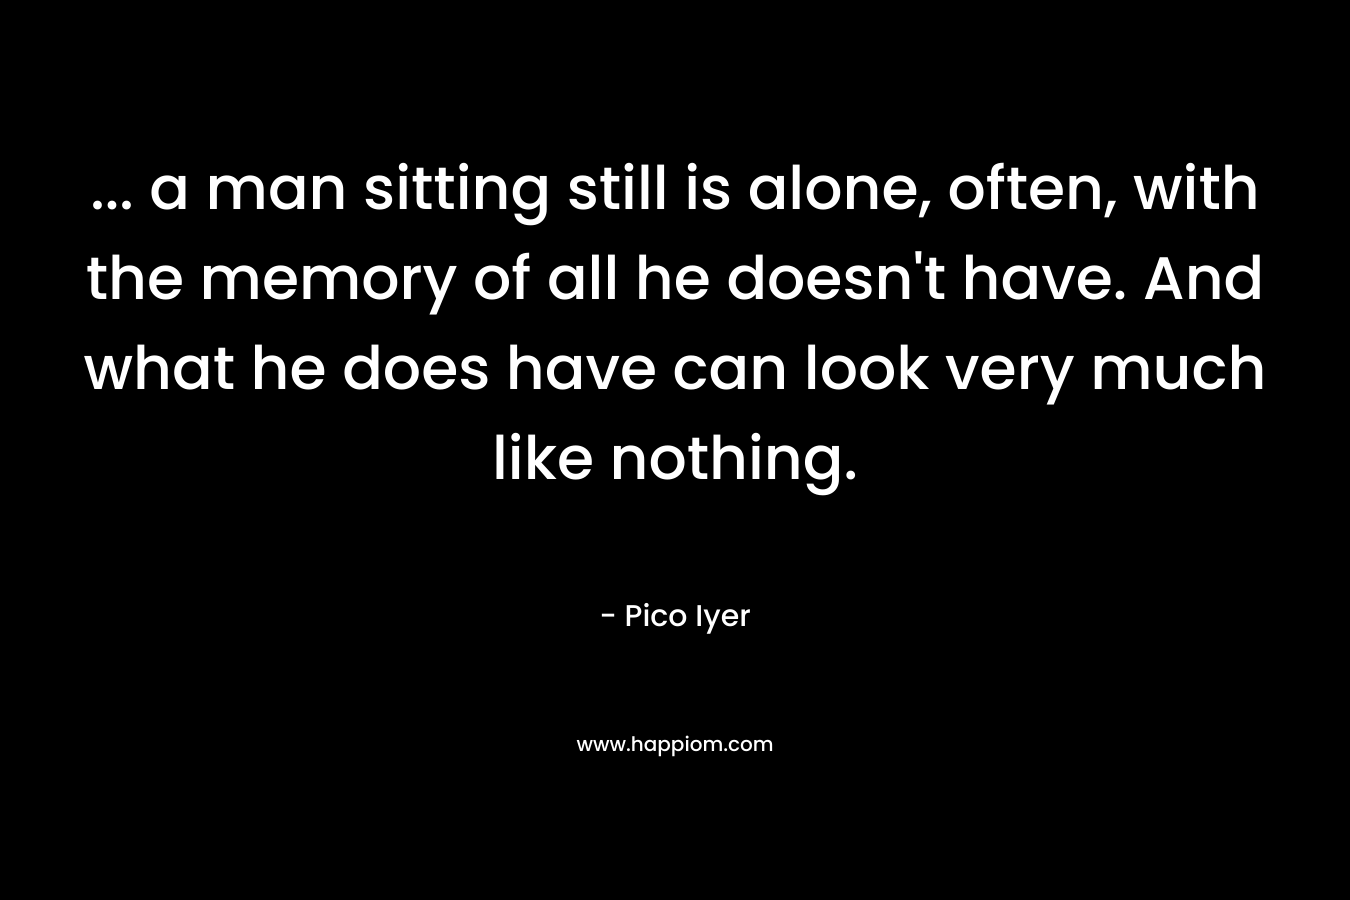 ... a man sitting still is alone, often, with the memory of all he doesn't have. And what he does have can look very much like nothing.